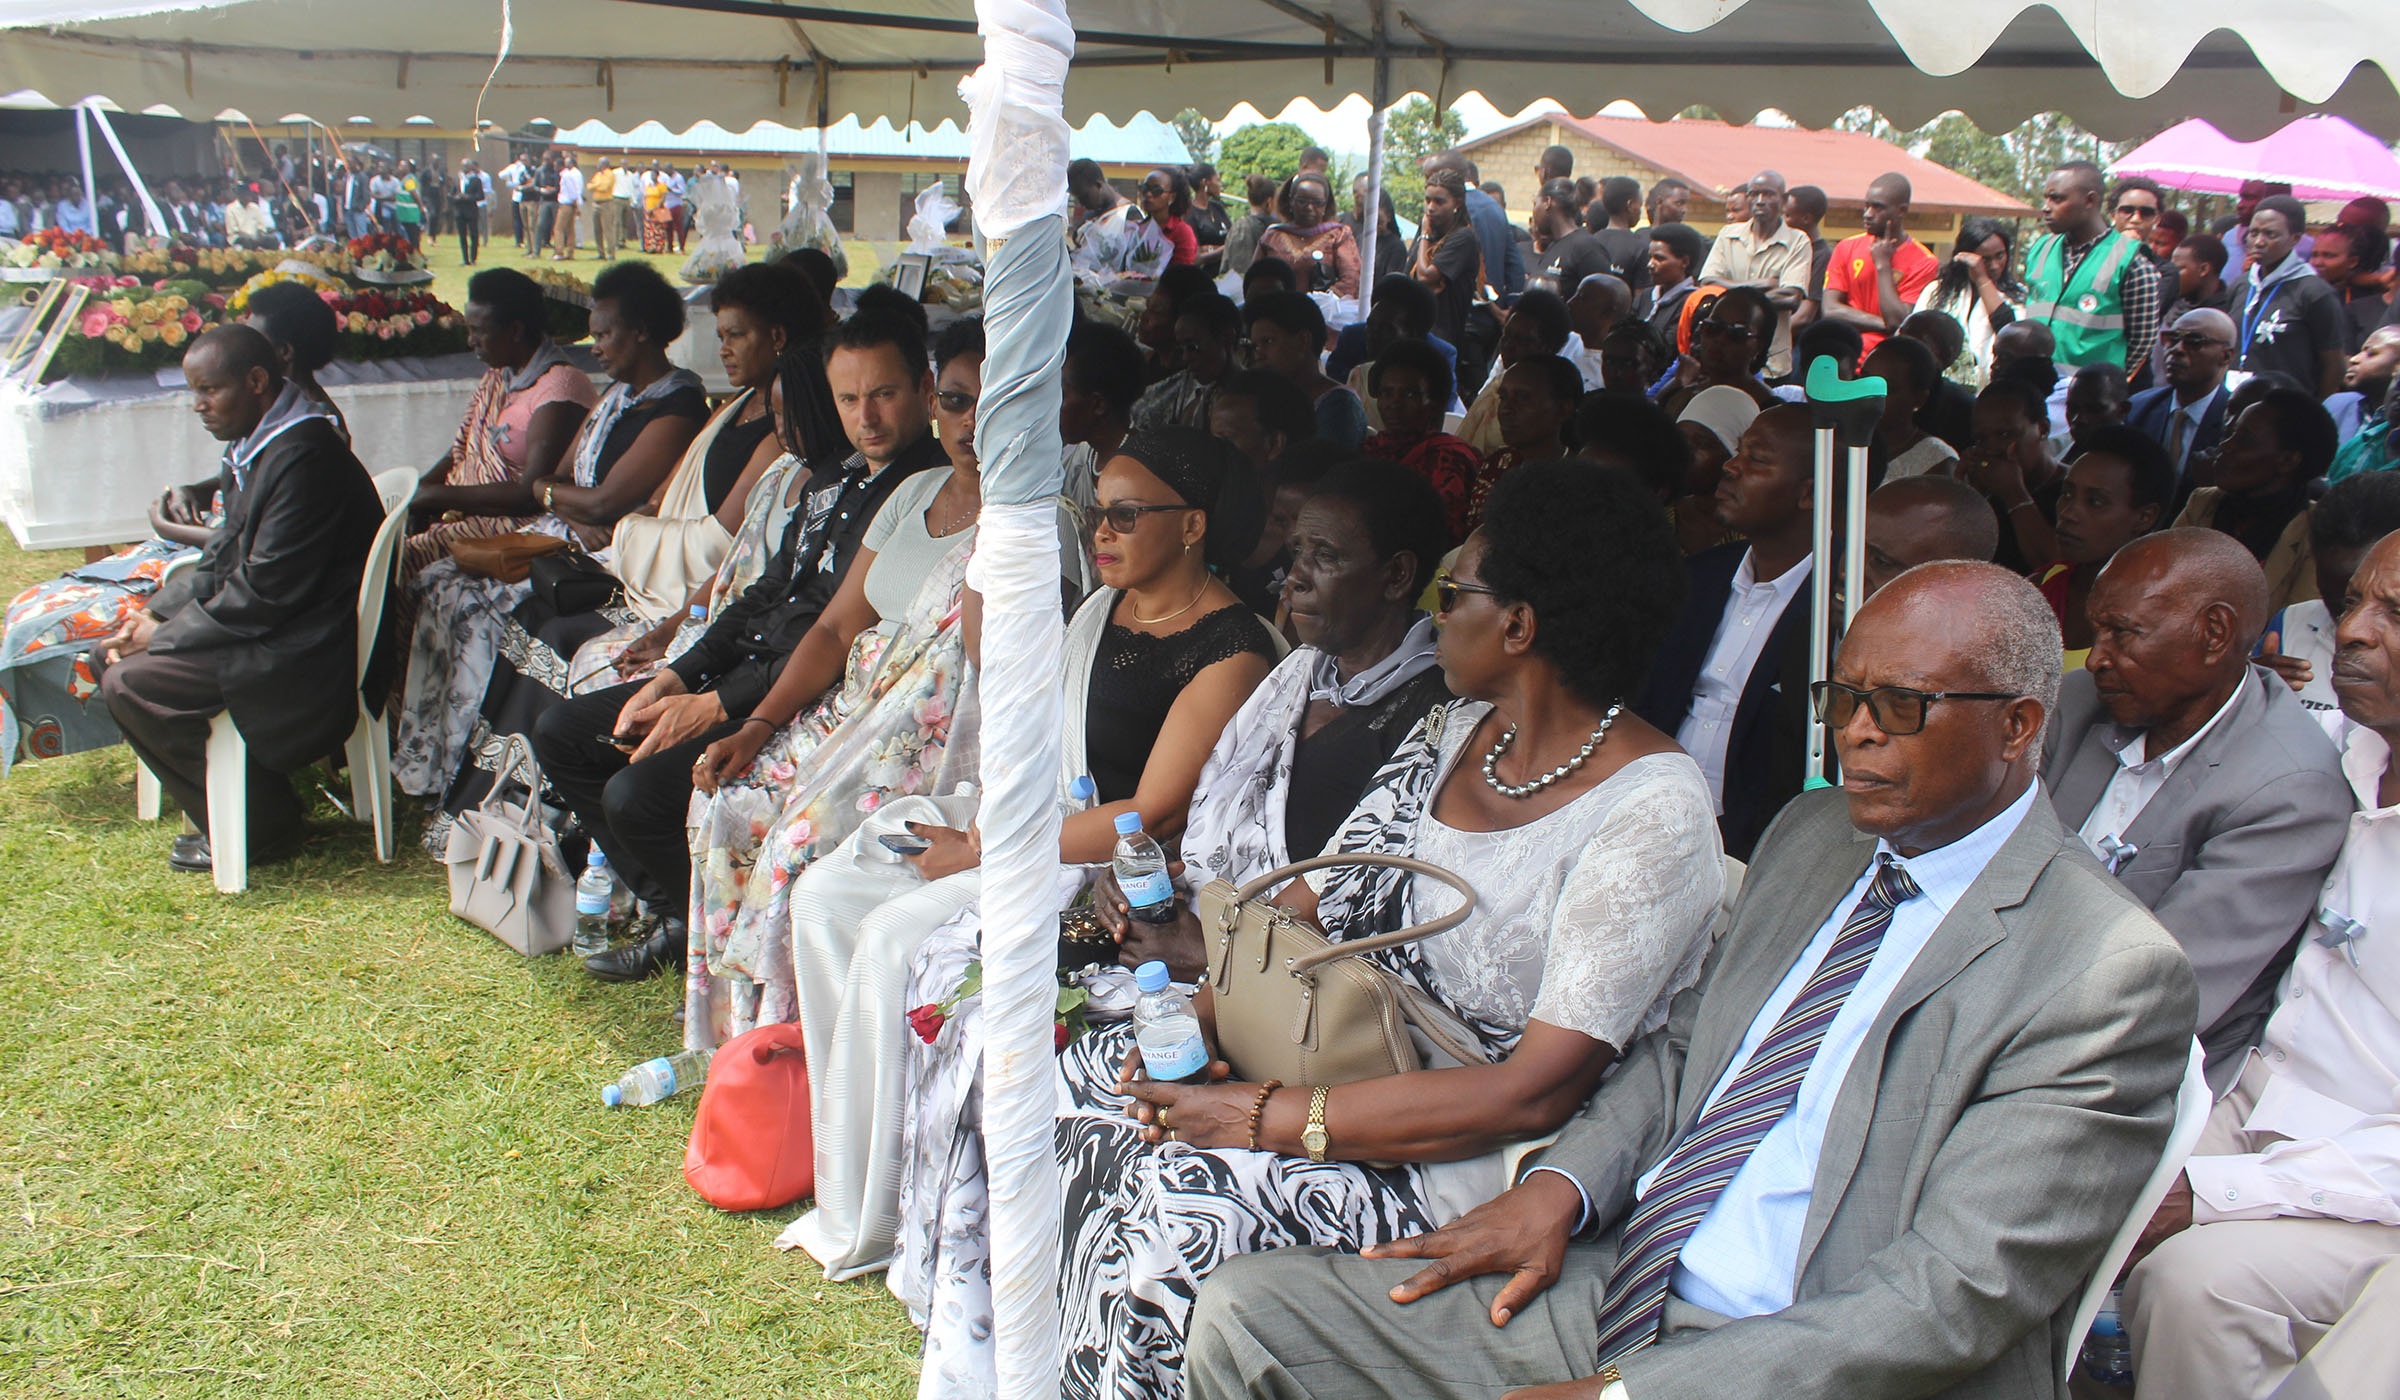 Genocide survivors whose family members were given a decent burial at Kiziguro Genocide Memorial, Gatsibo District on April 11, 2019. Photos by Jean de Dieu Nsabimana.